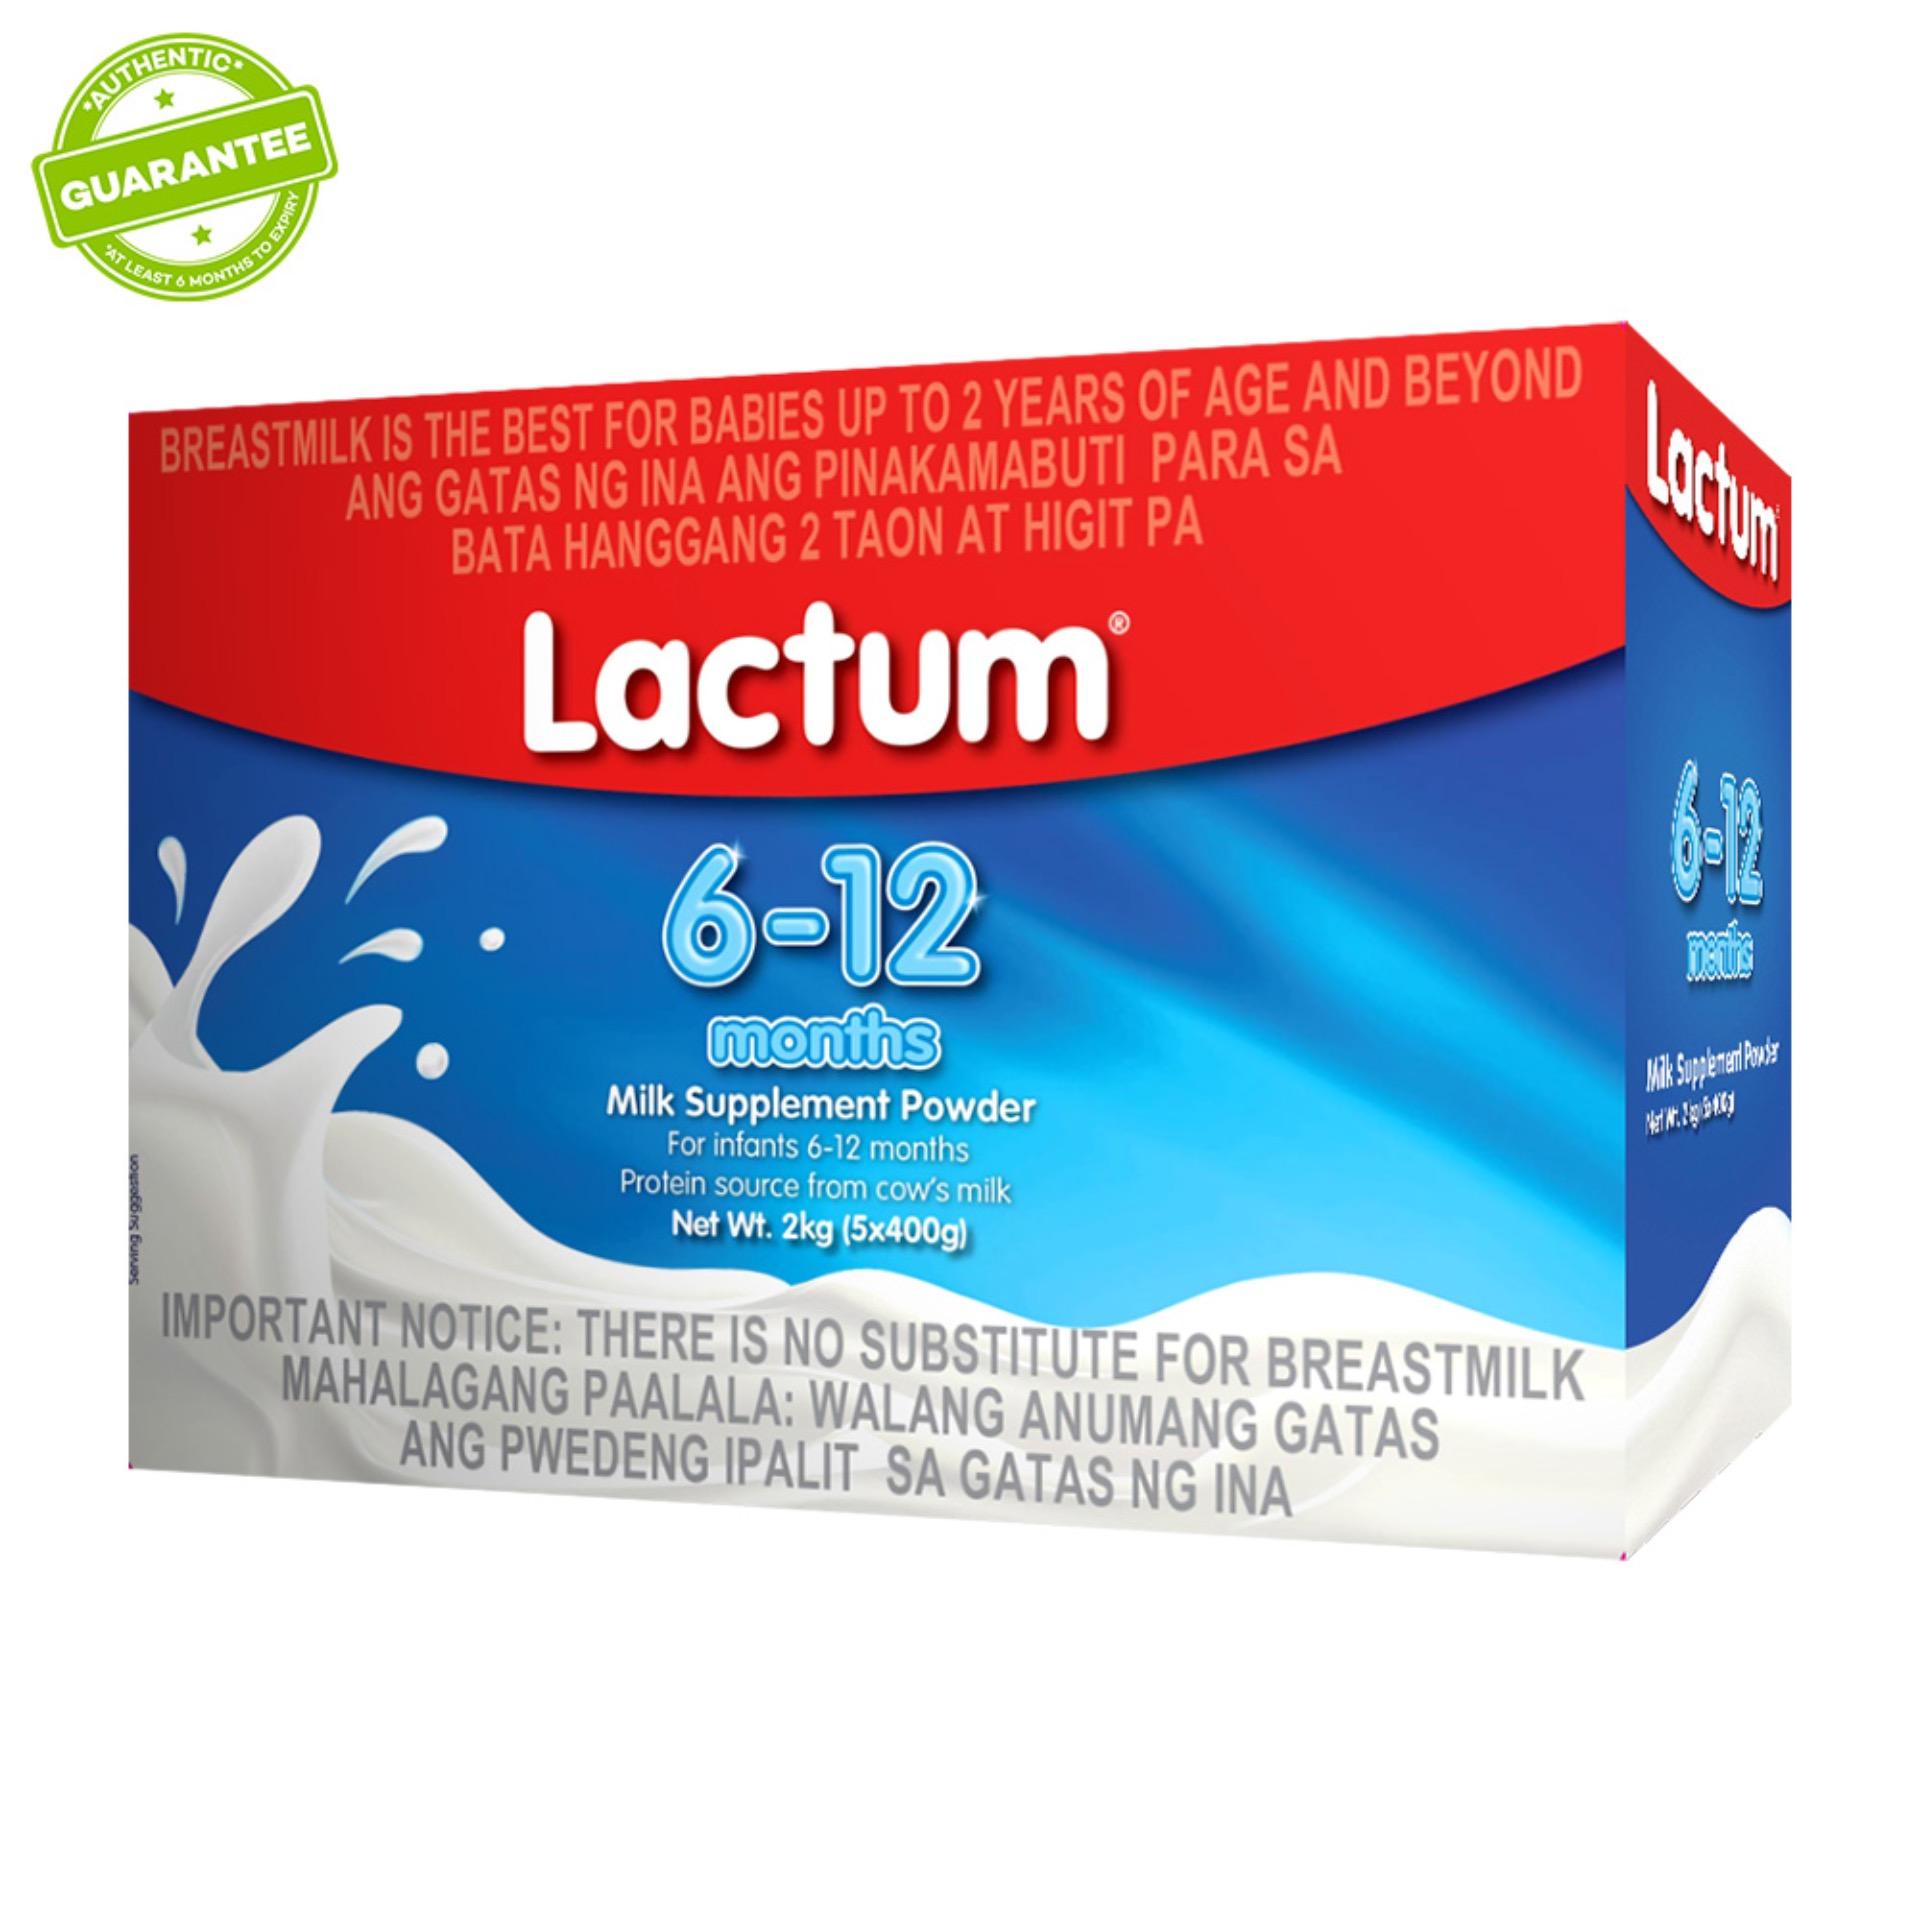 Lactum for 6-12 Months Old 2kg: Buy 